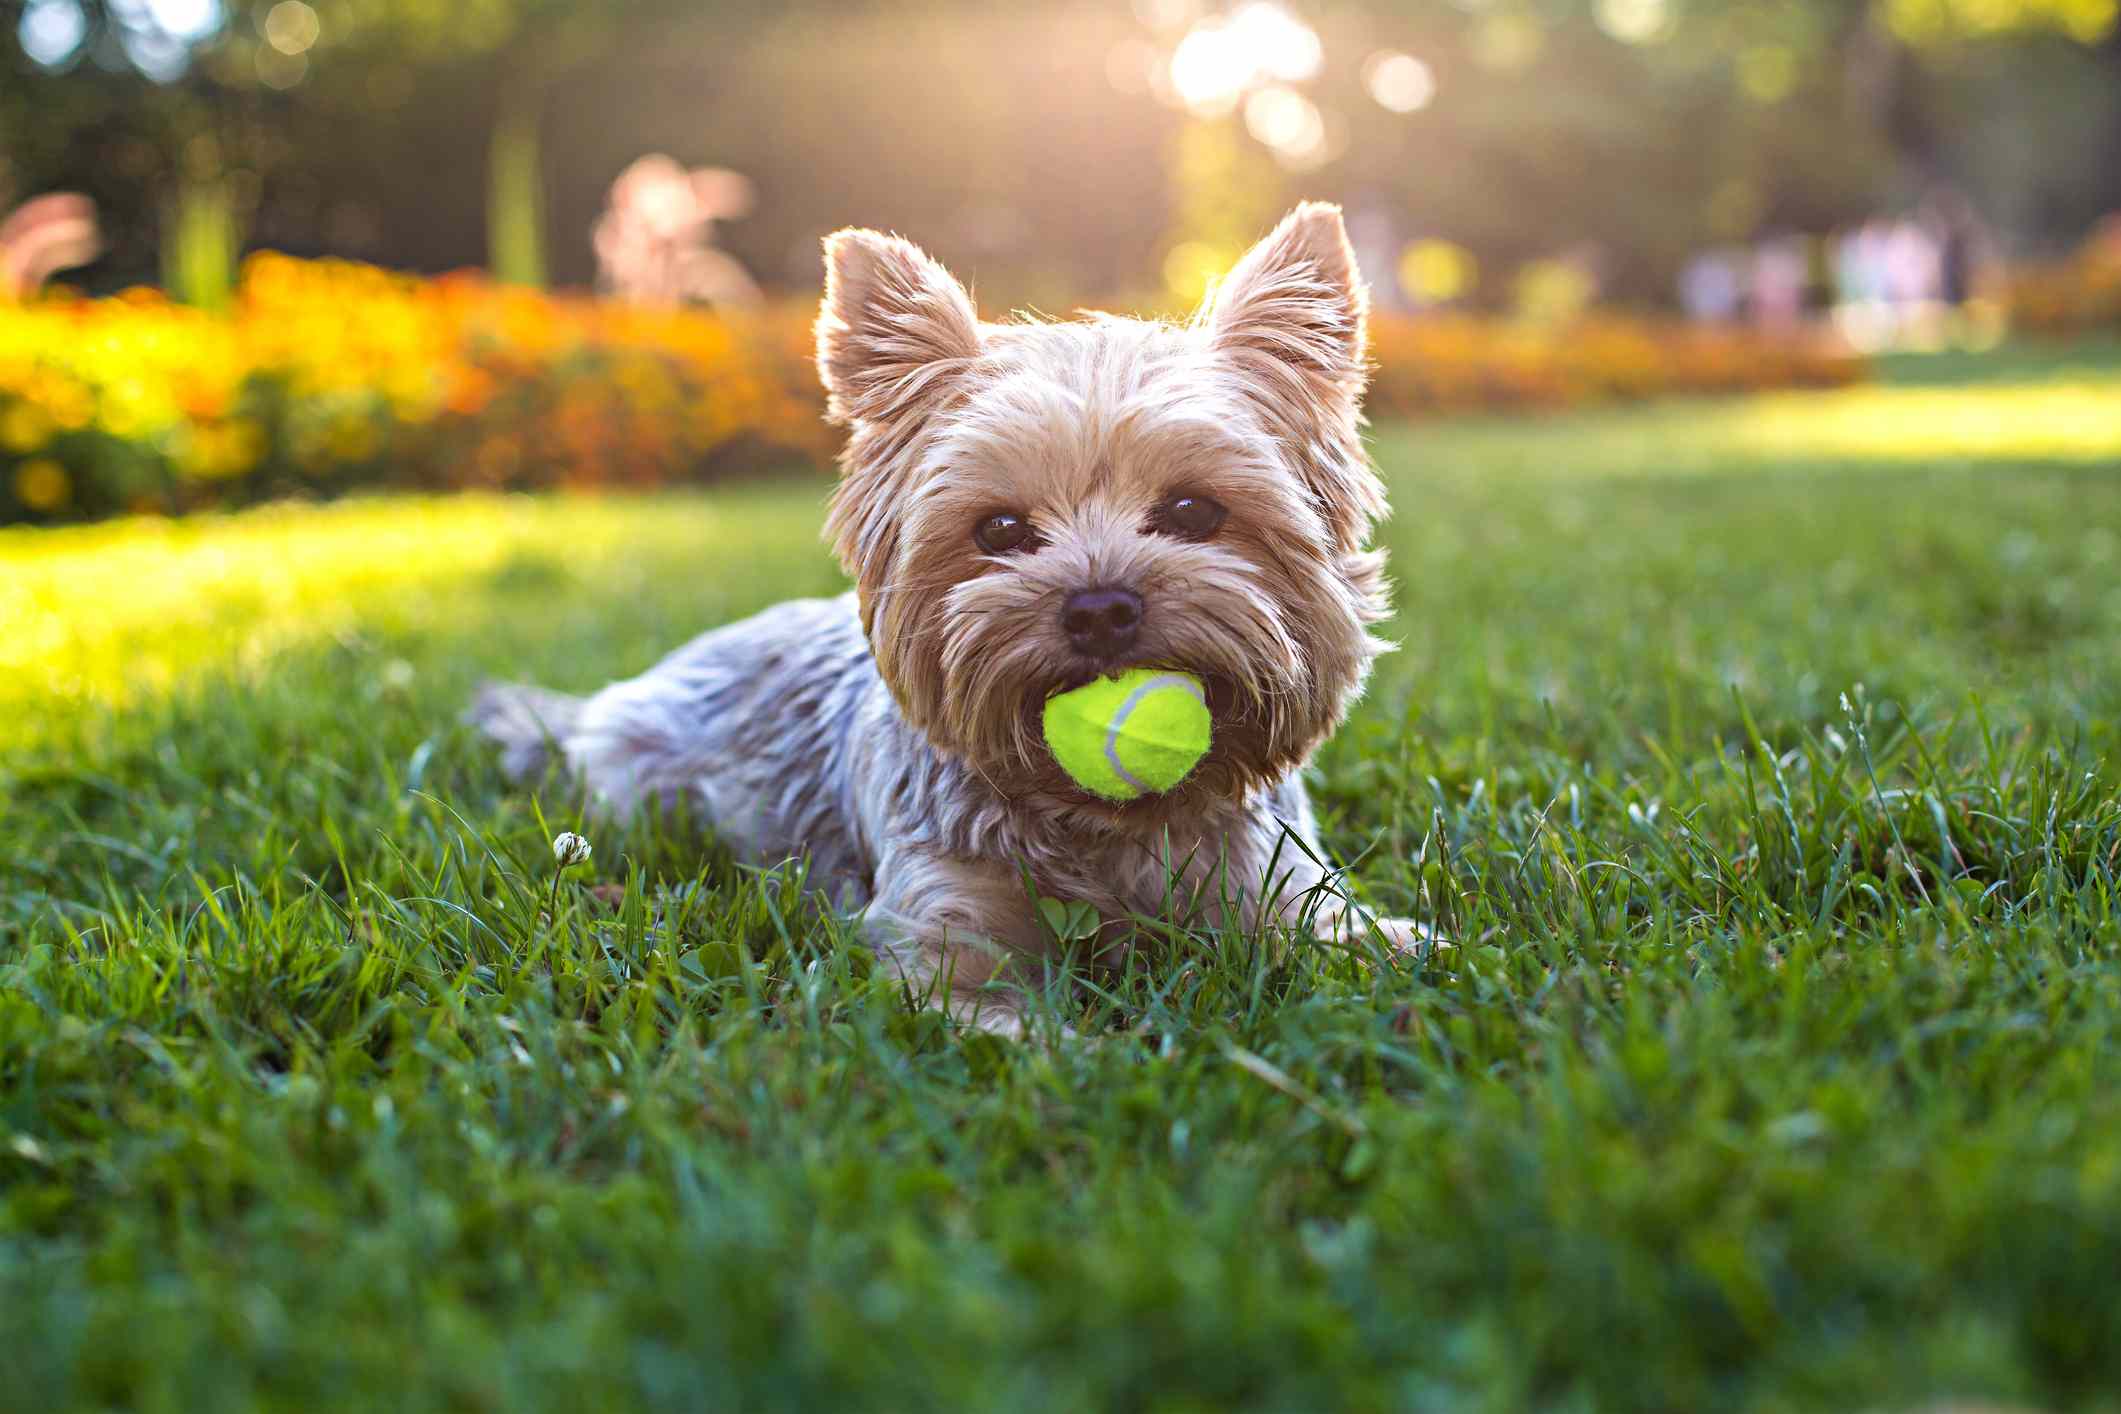 Yorkshire terrier in grass with tennis ball in mouth